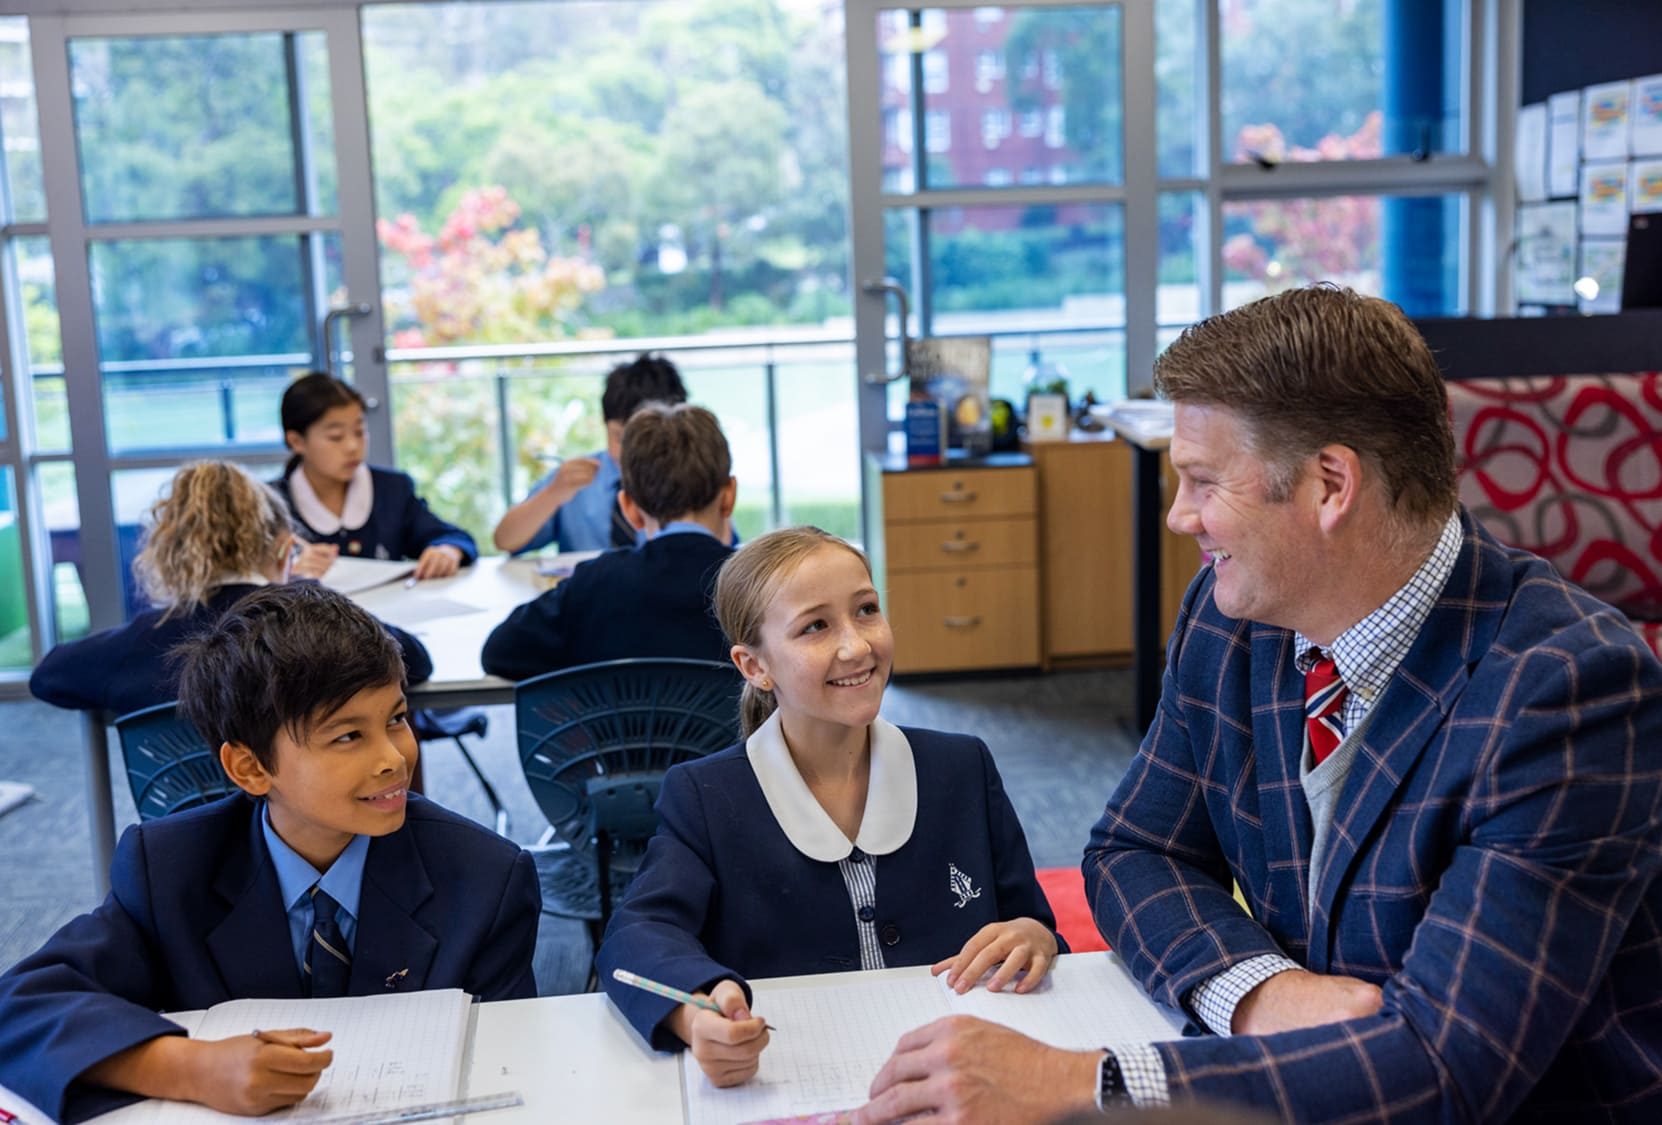 A Redlands teacher and two Junior School students in a classroom